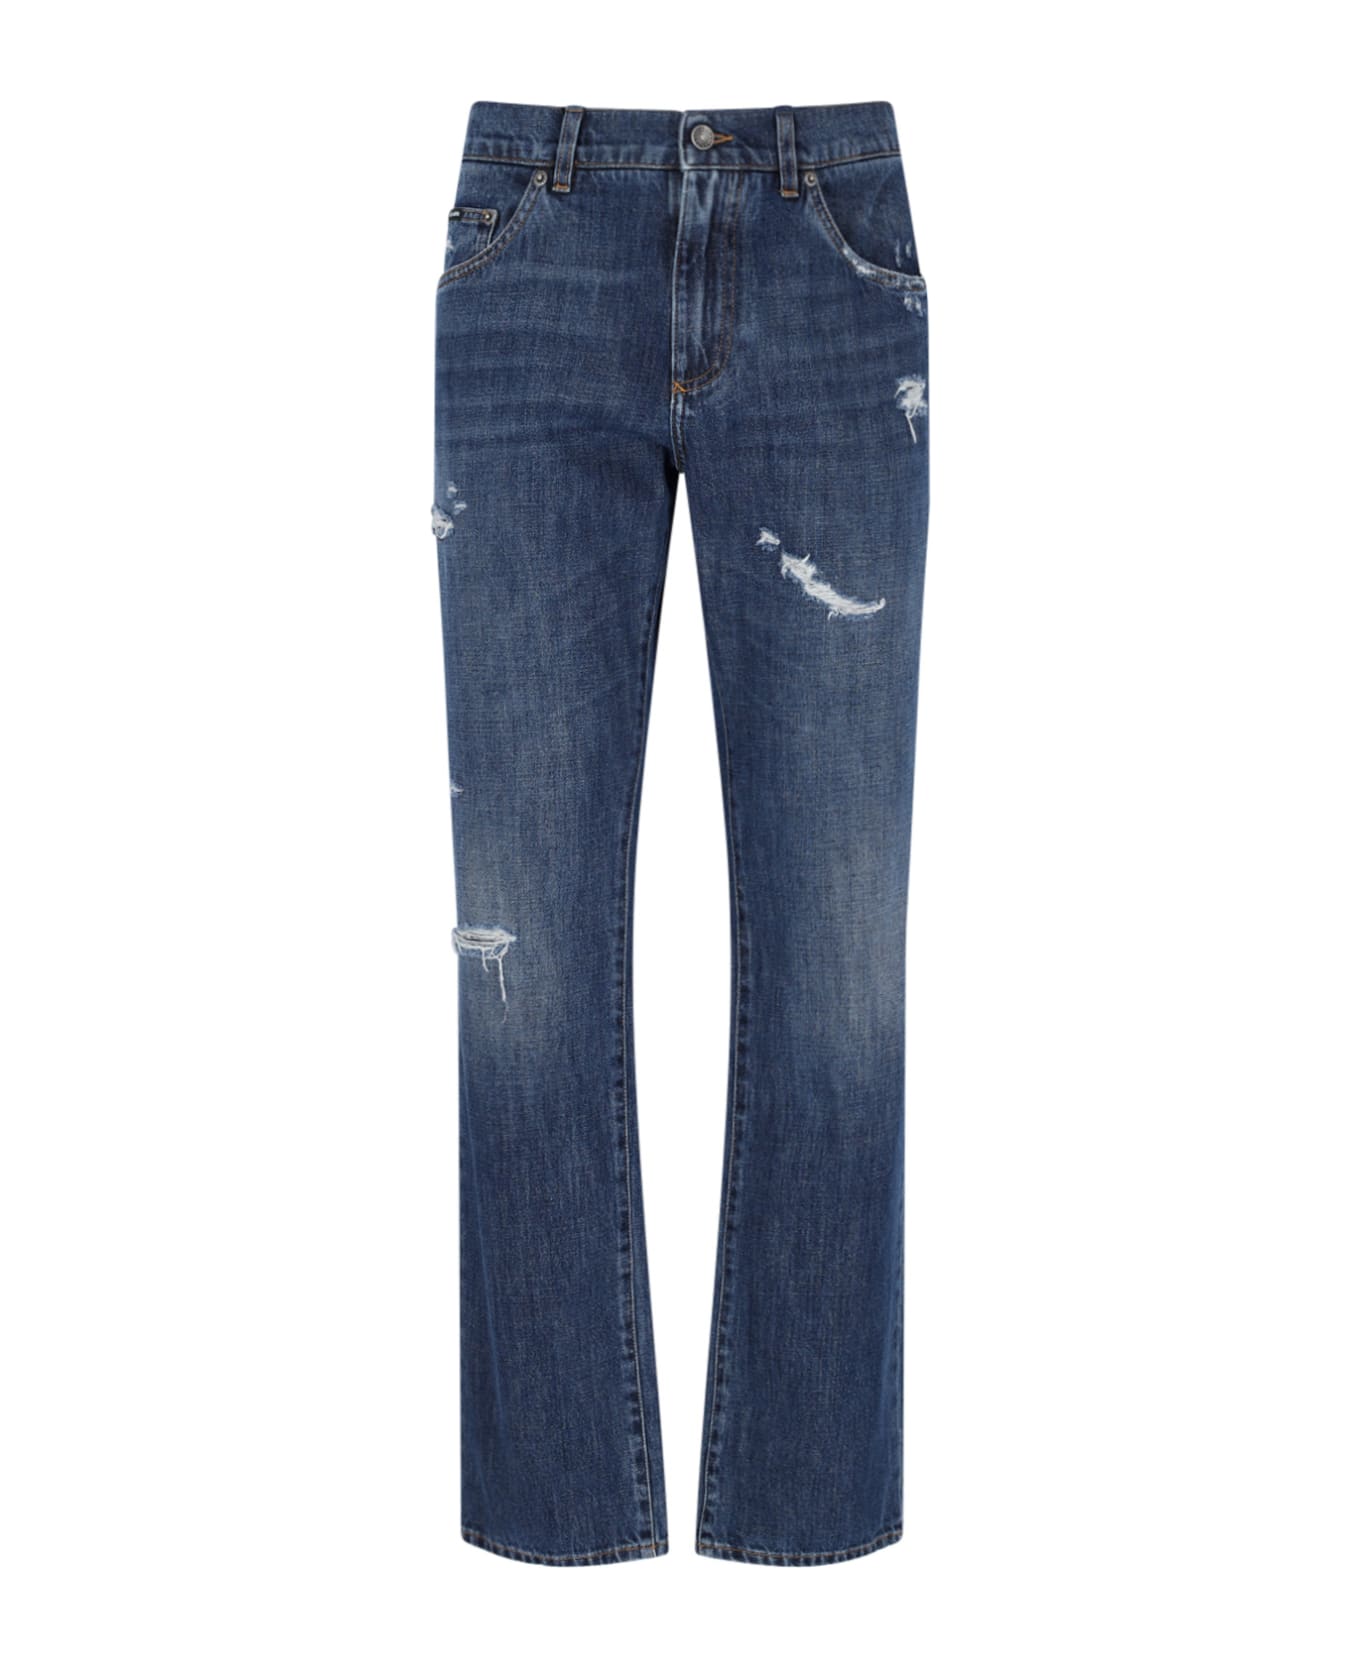 Dolce & Gabbana Jeans With Scraping - Light blue